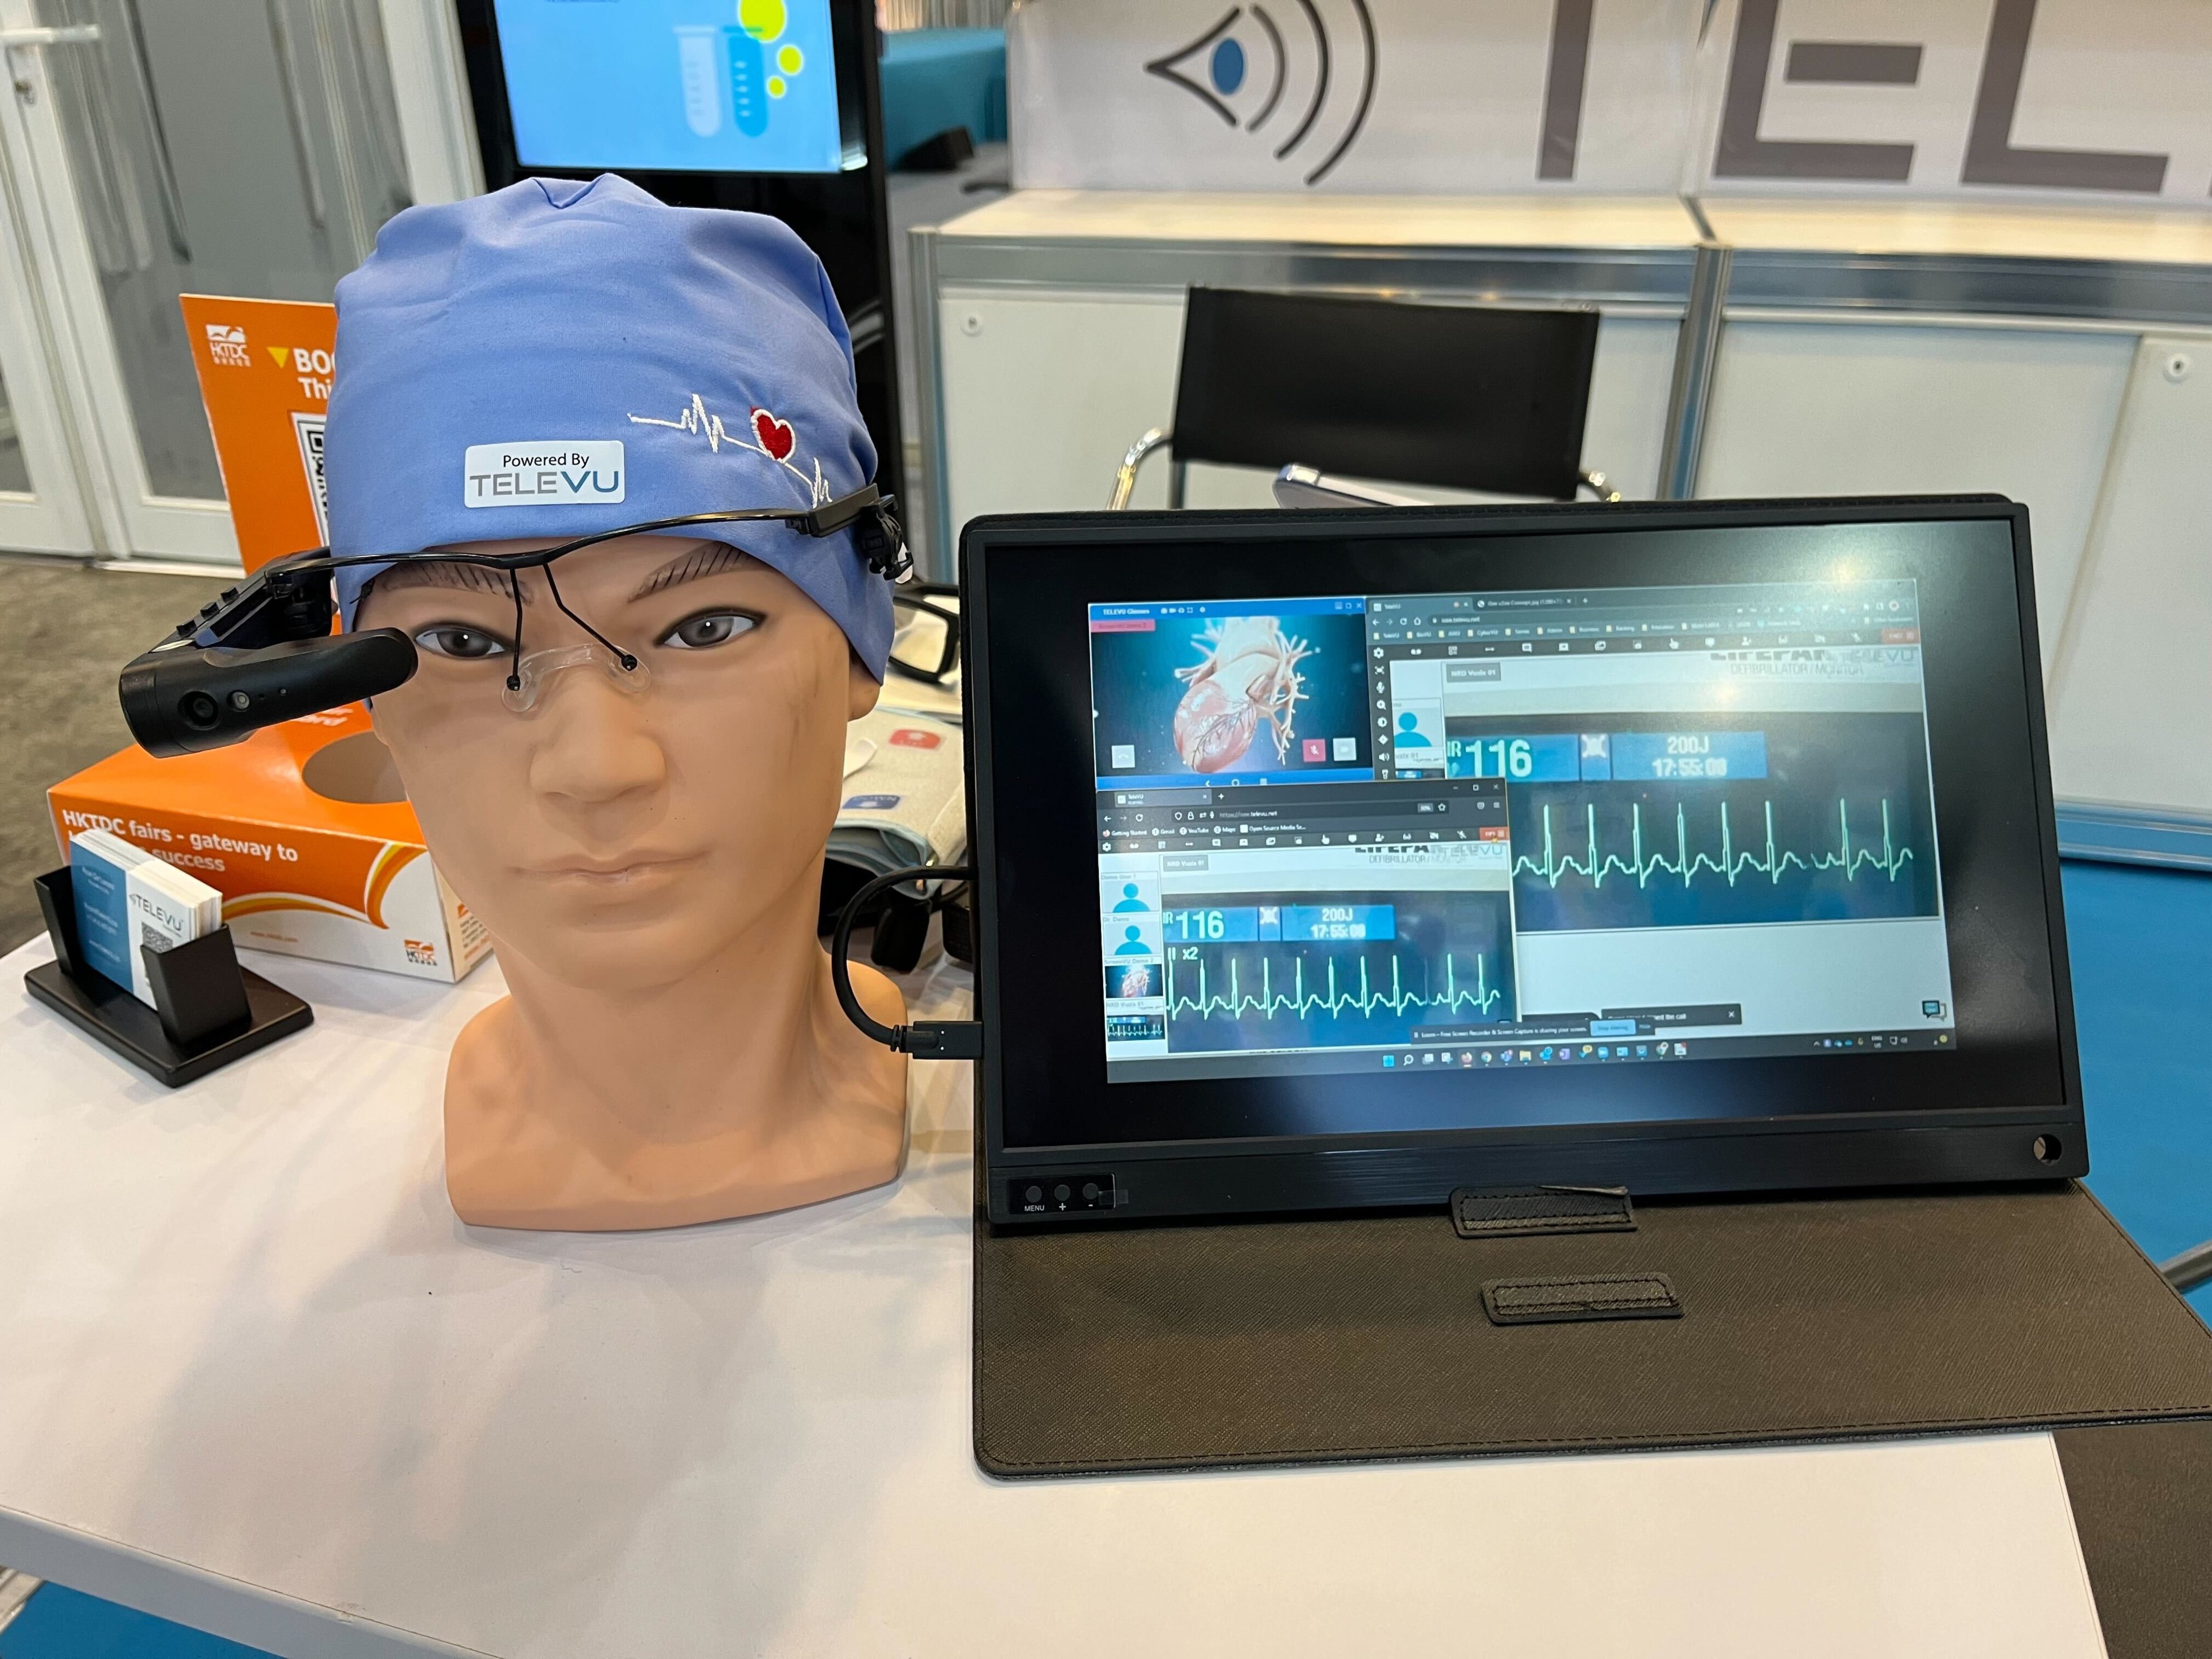 A Canadian company has developed smart glasses designed for healthcare professionals to have real-time video calls. Photo: Sammy Heung